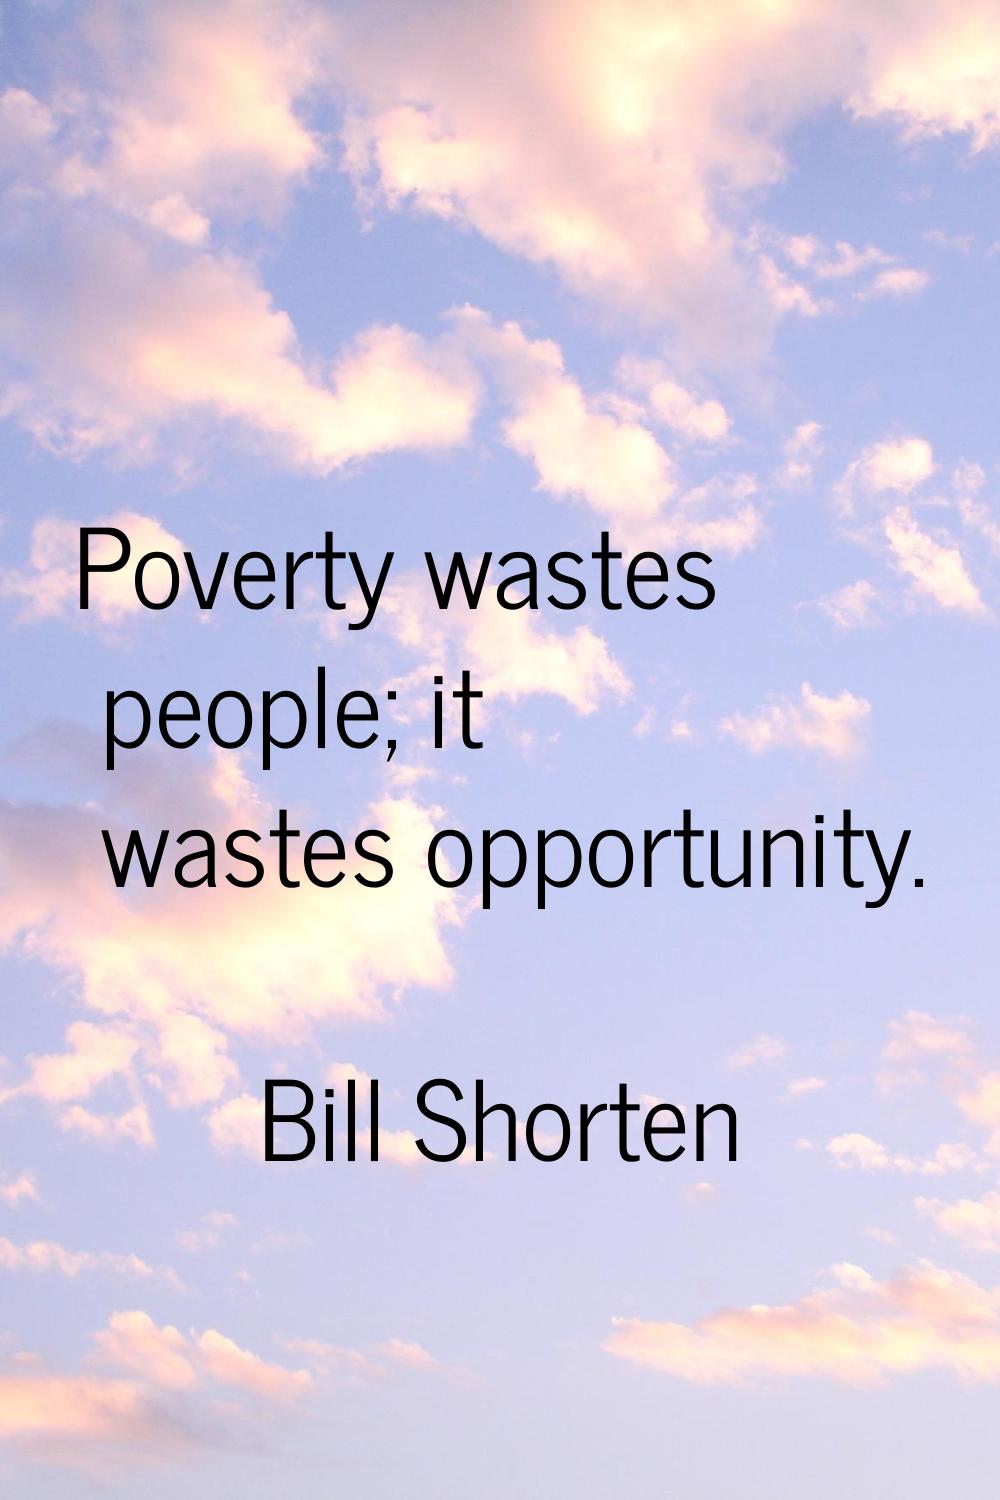 Poverty wastes people; it wastes opportunity.